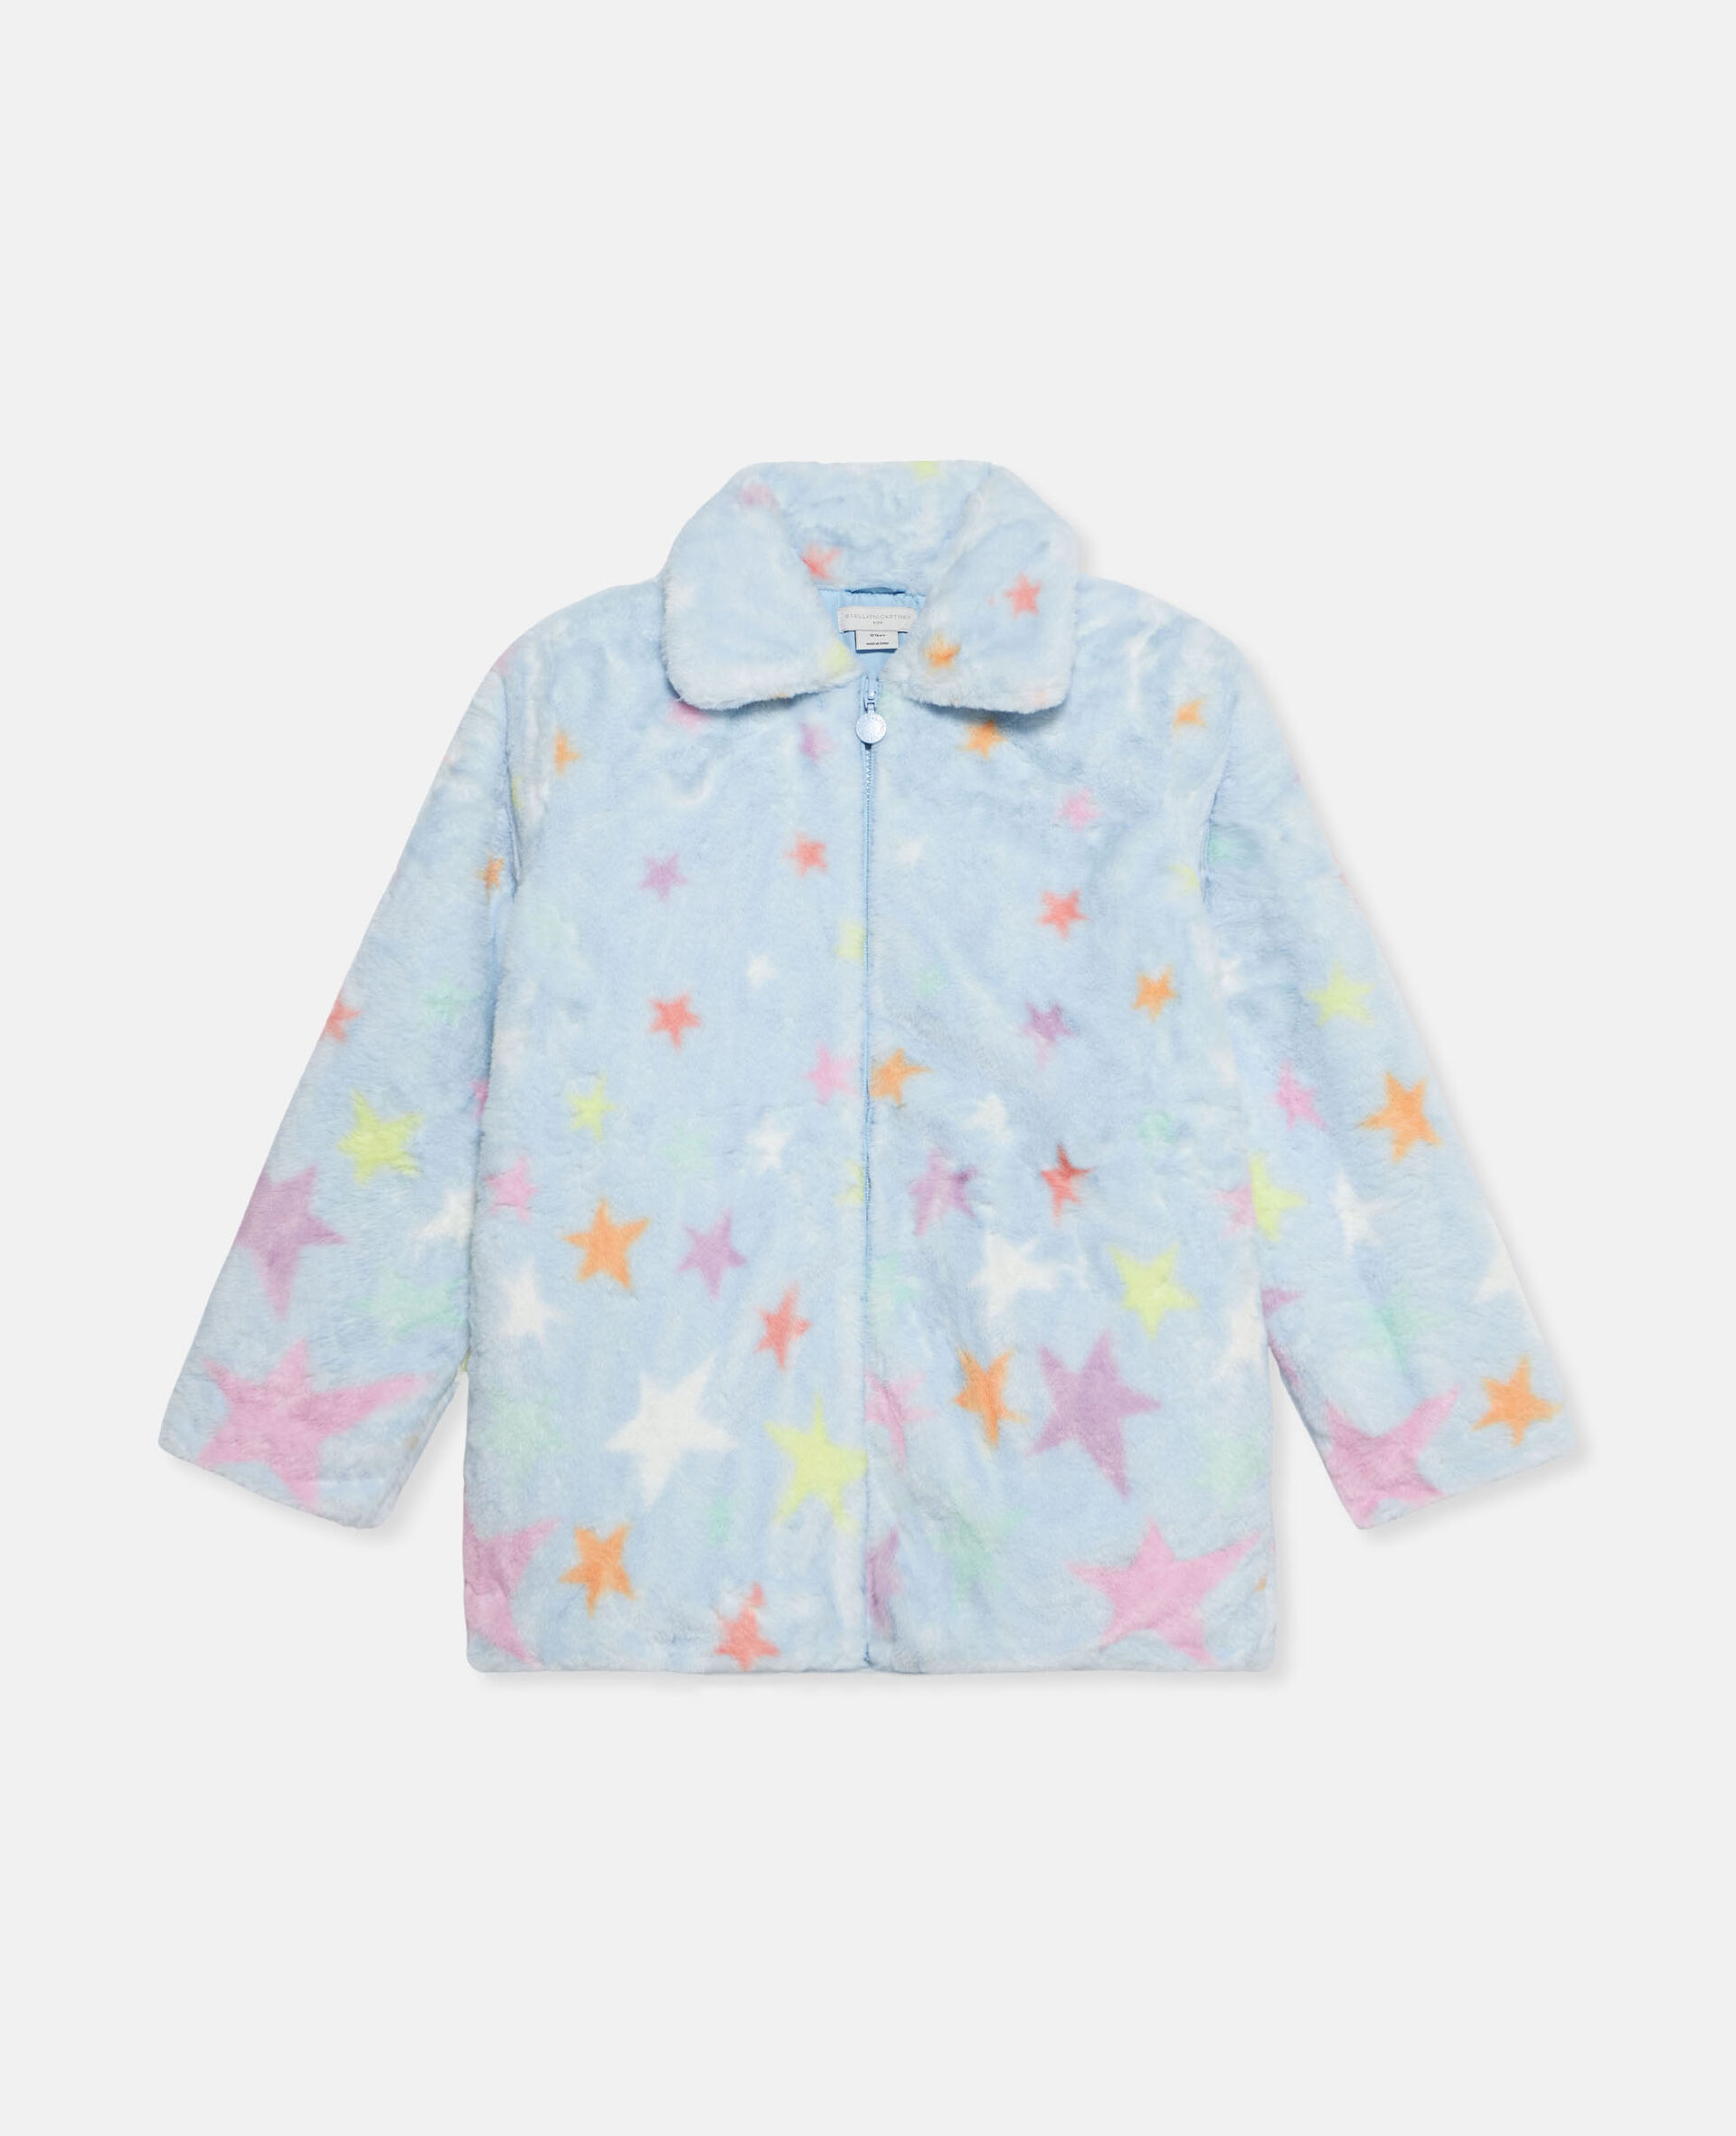 Star Print Fluffy Collared Jacket-Multicolour-large image number 0